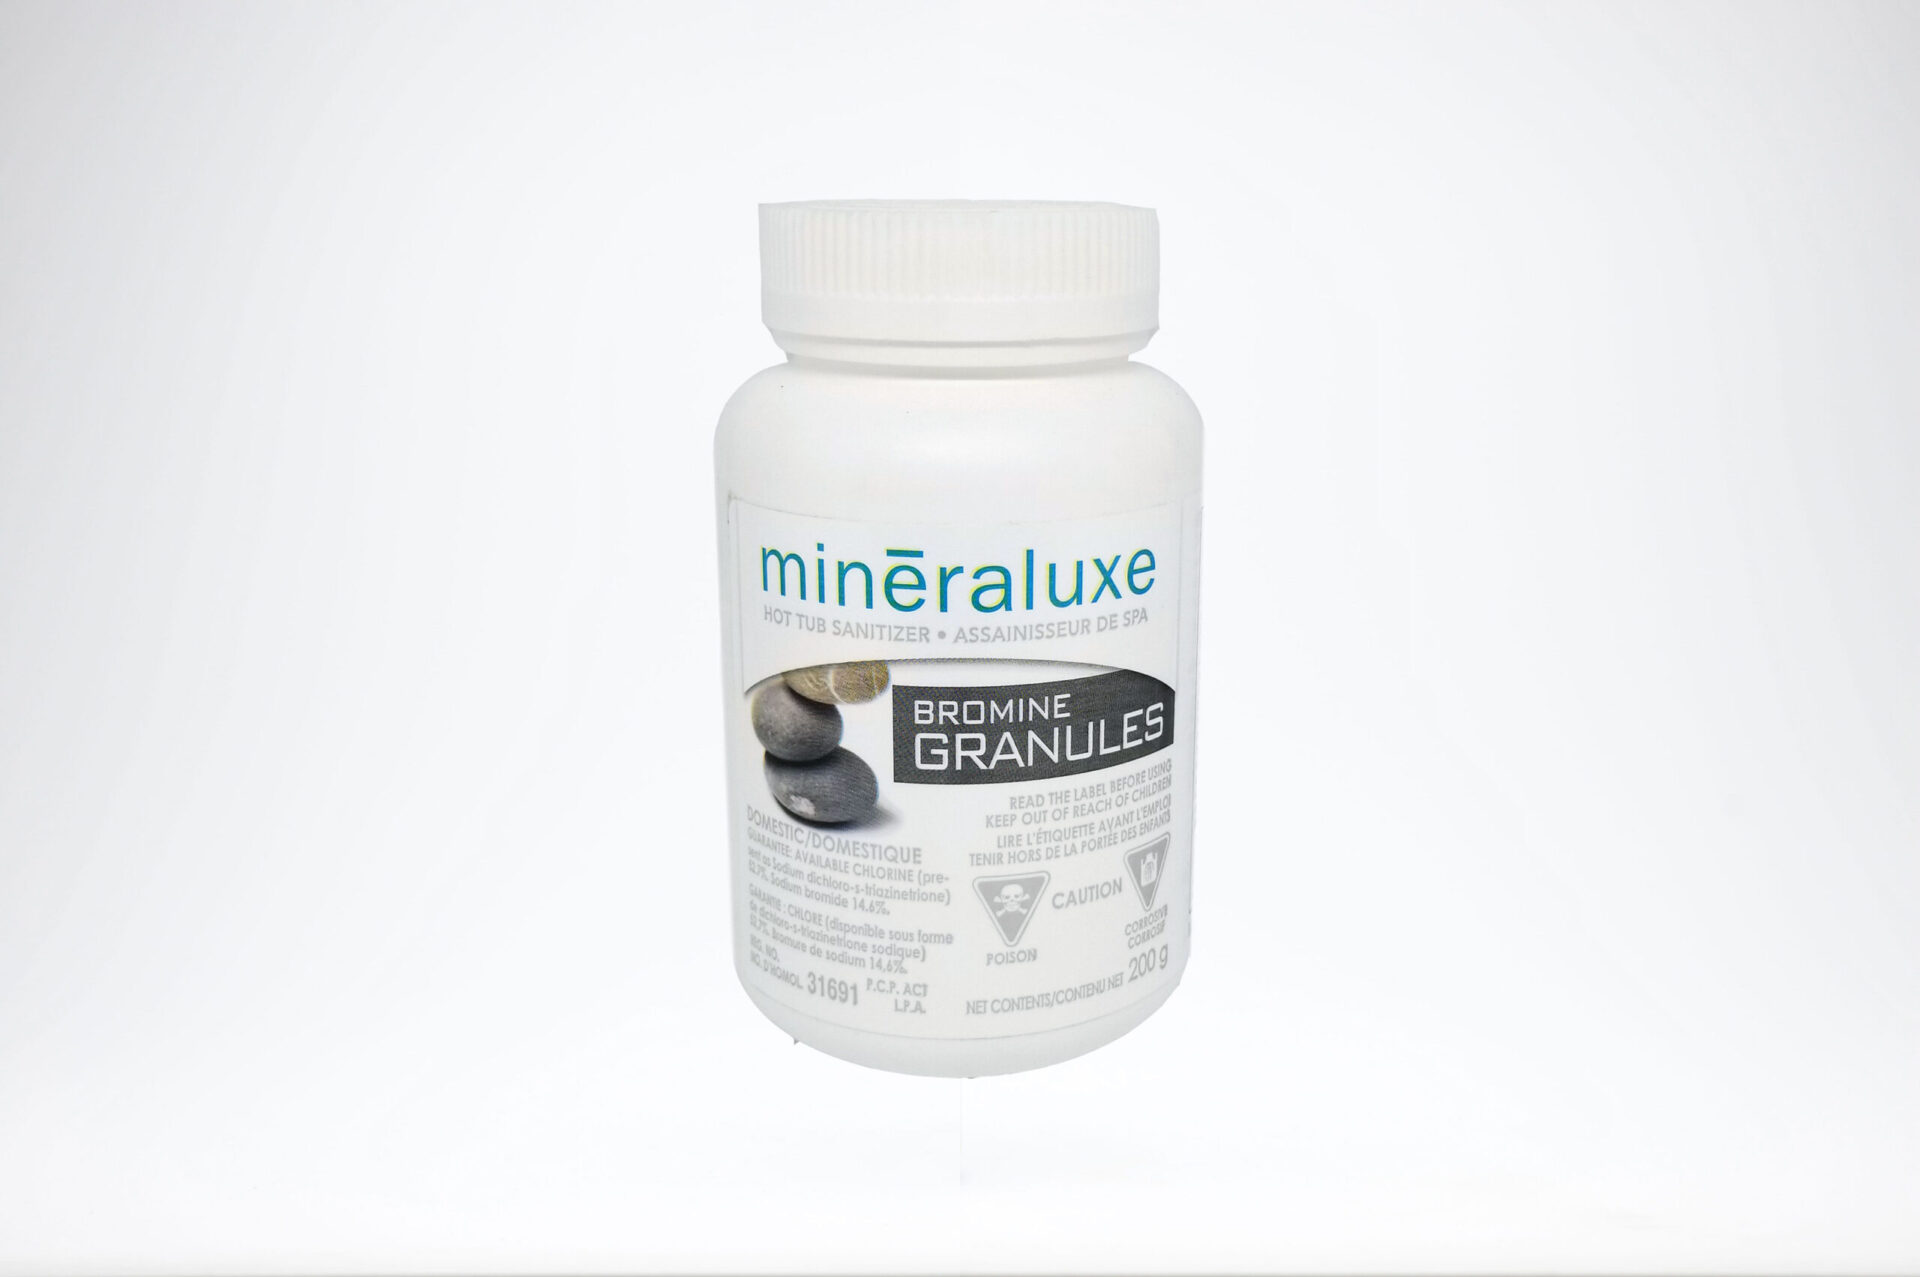 Mineraluxe Bromine Granules 200g 1 scaled - MINERALUXE BROMINE GRANULES - 200G